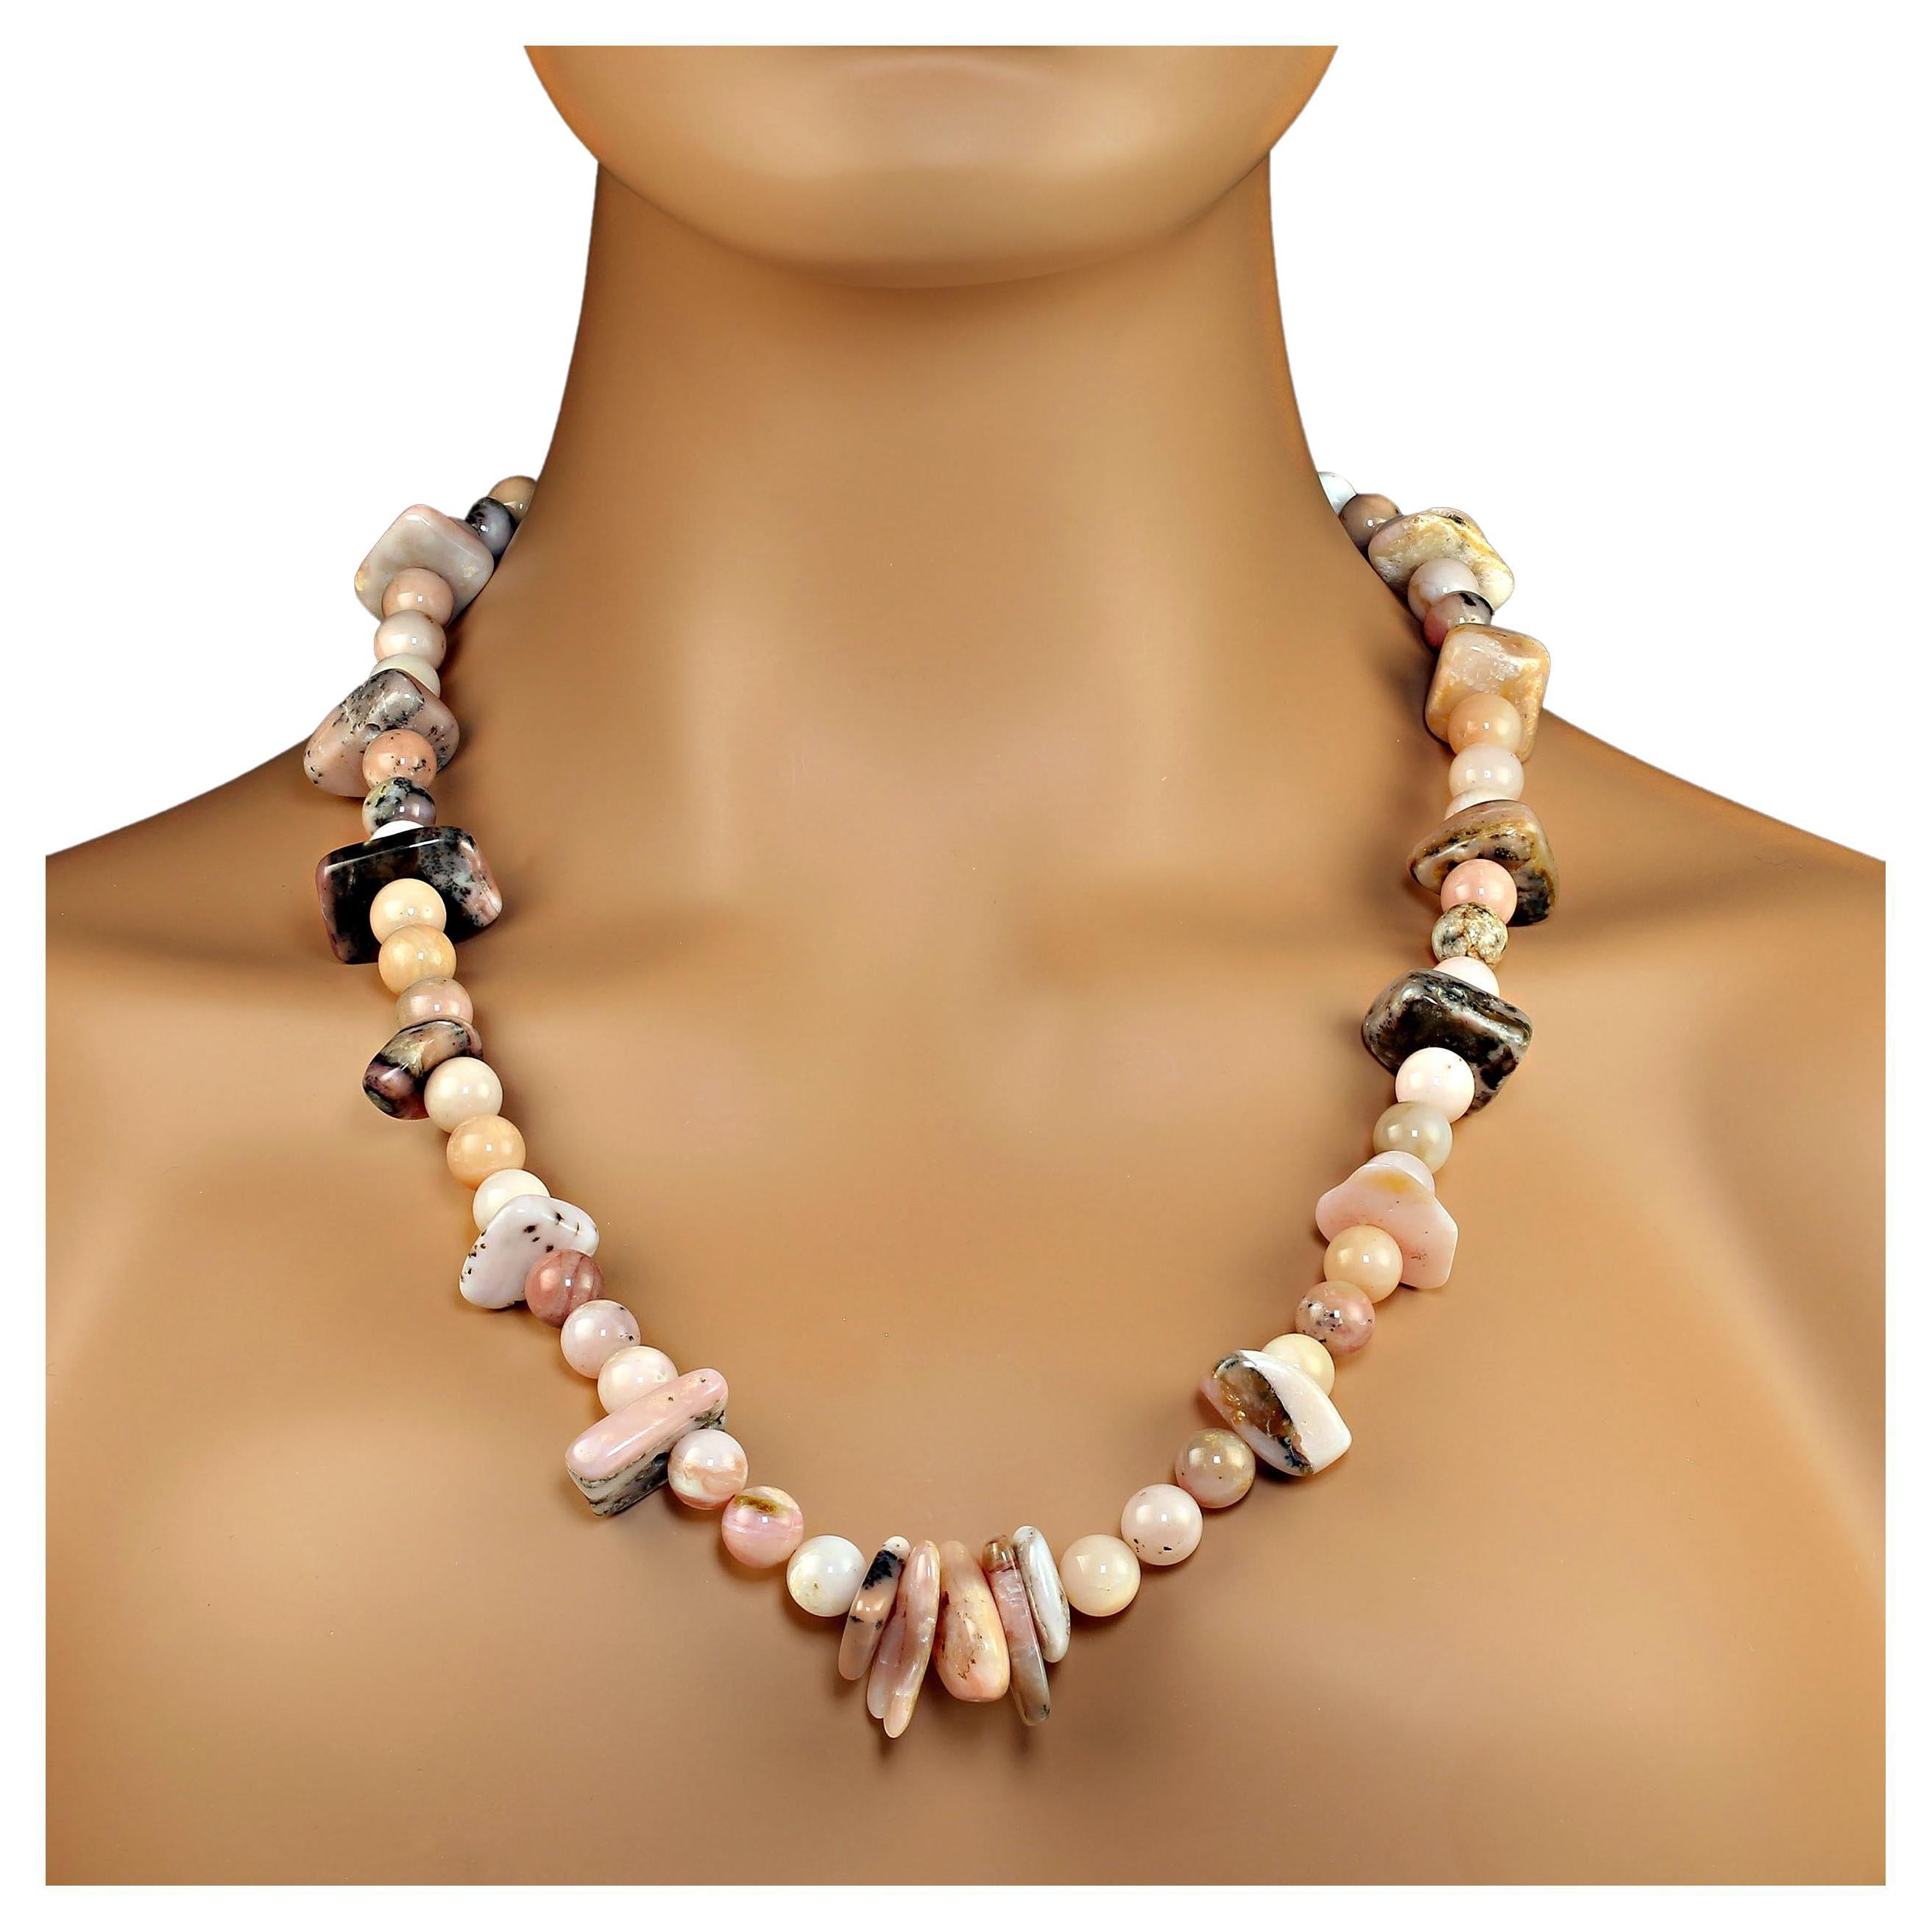 AJD 25 Inch Pink Peruvian Opal necklace perfect for Winter 